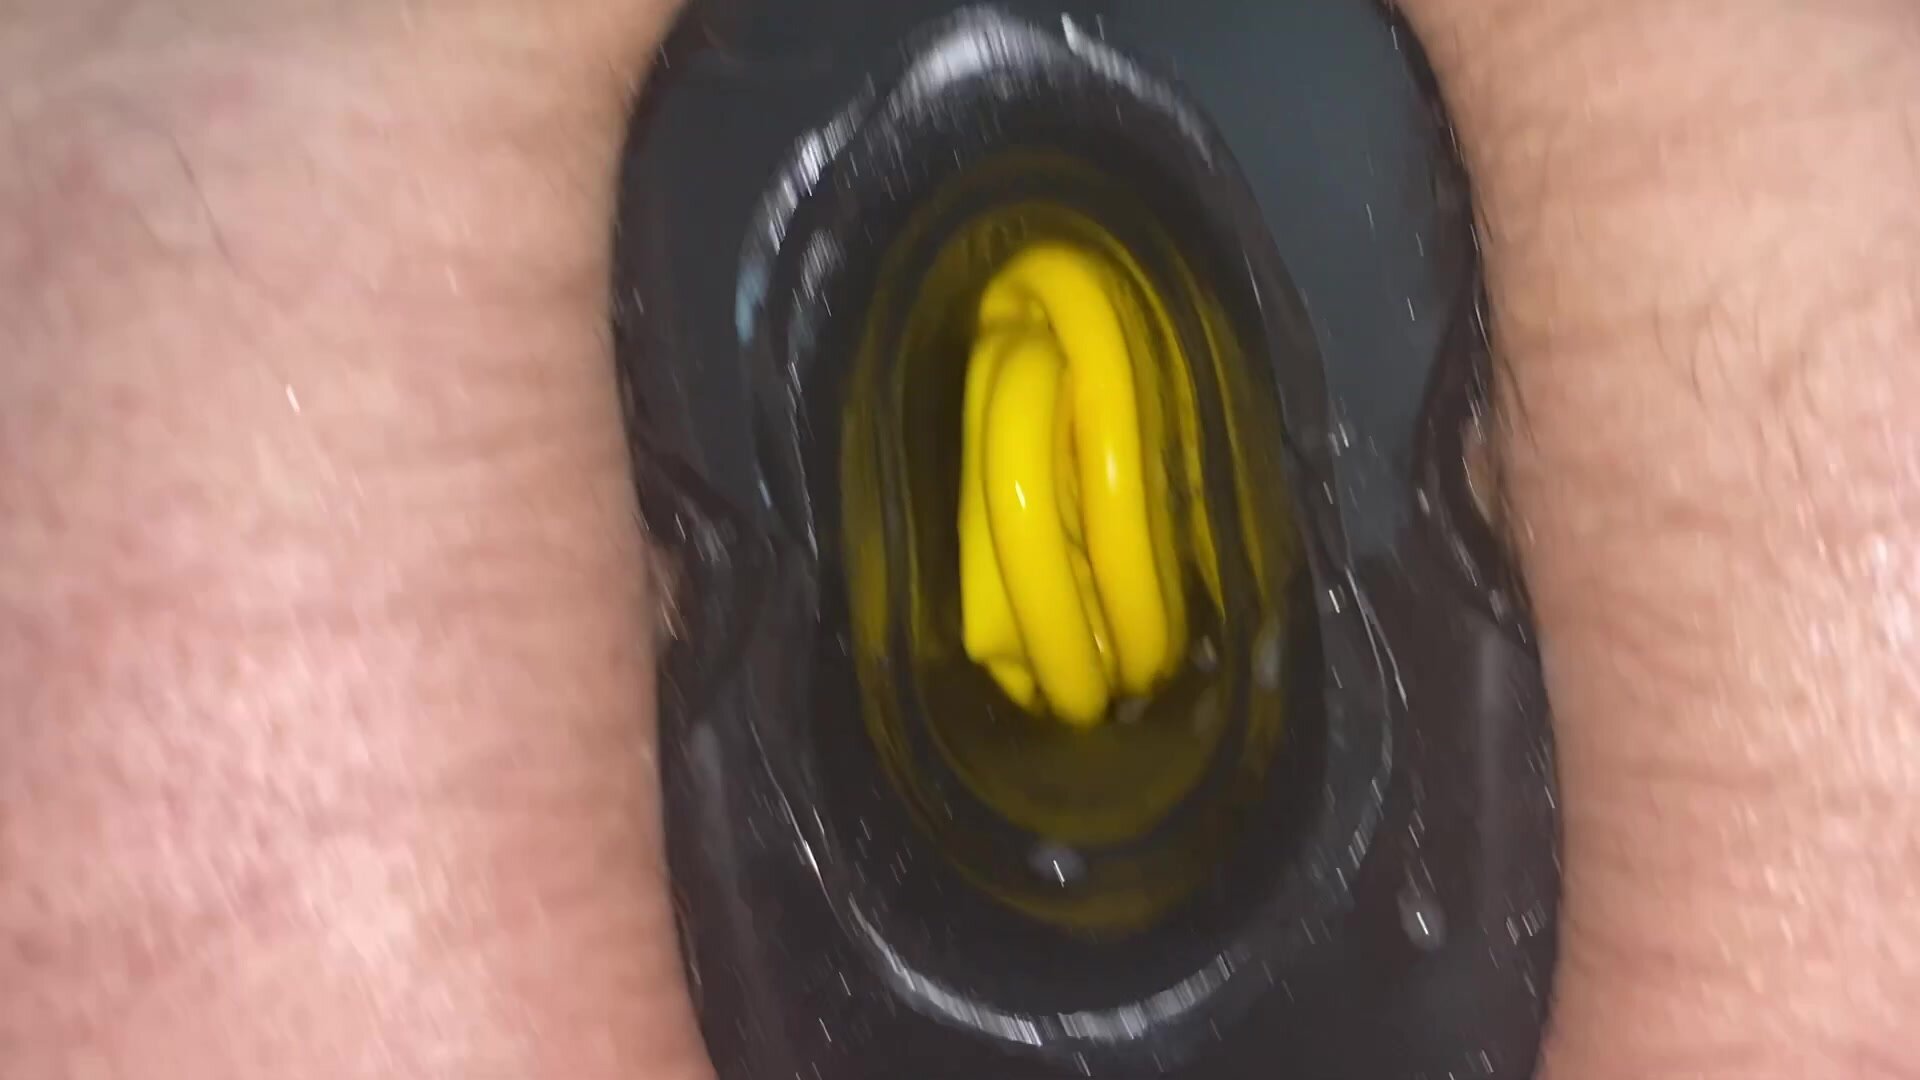 Pighole with yellow Rubber Glove in ass